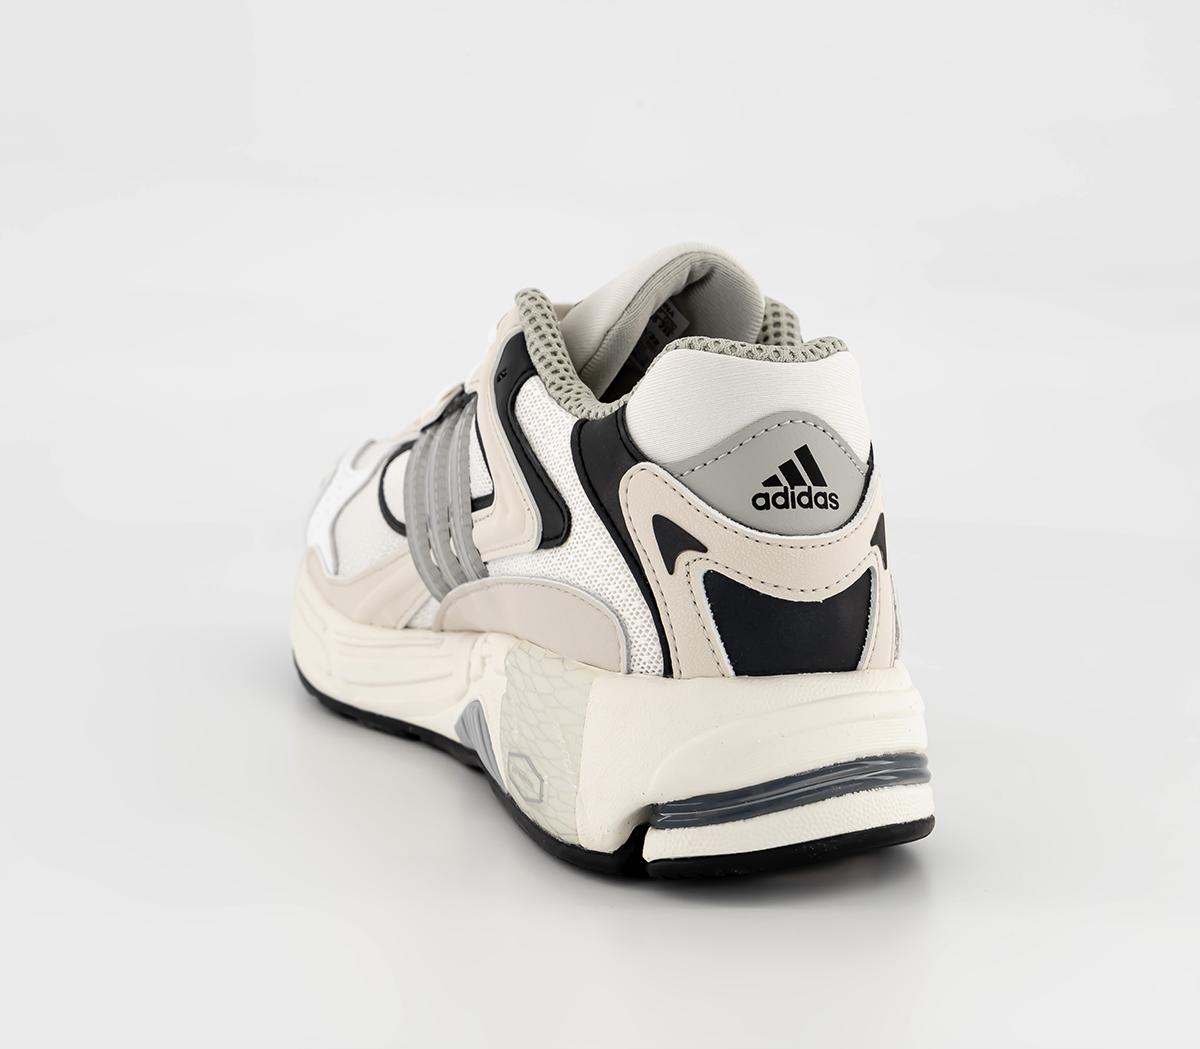 adidas Response Cl Trainers Chalk White Clear Brown Chalk White - Women ...